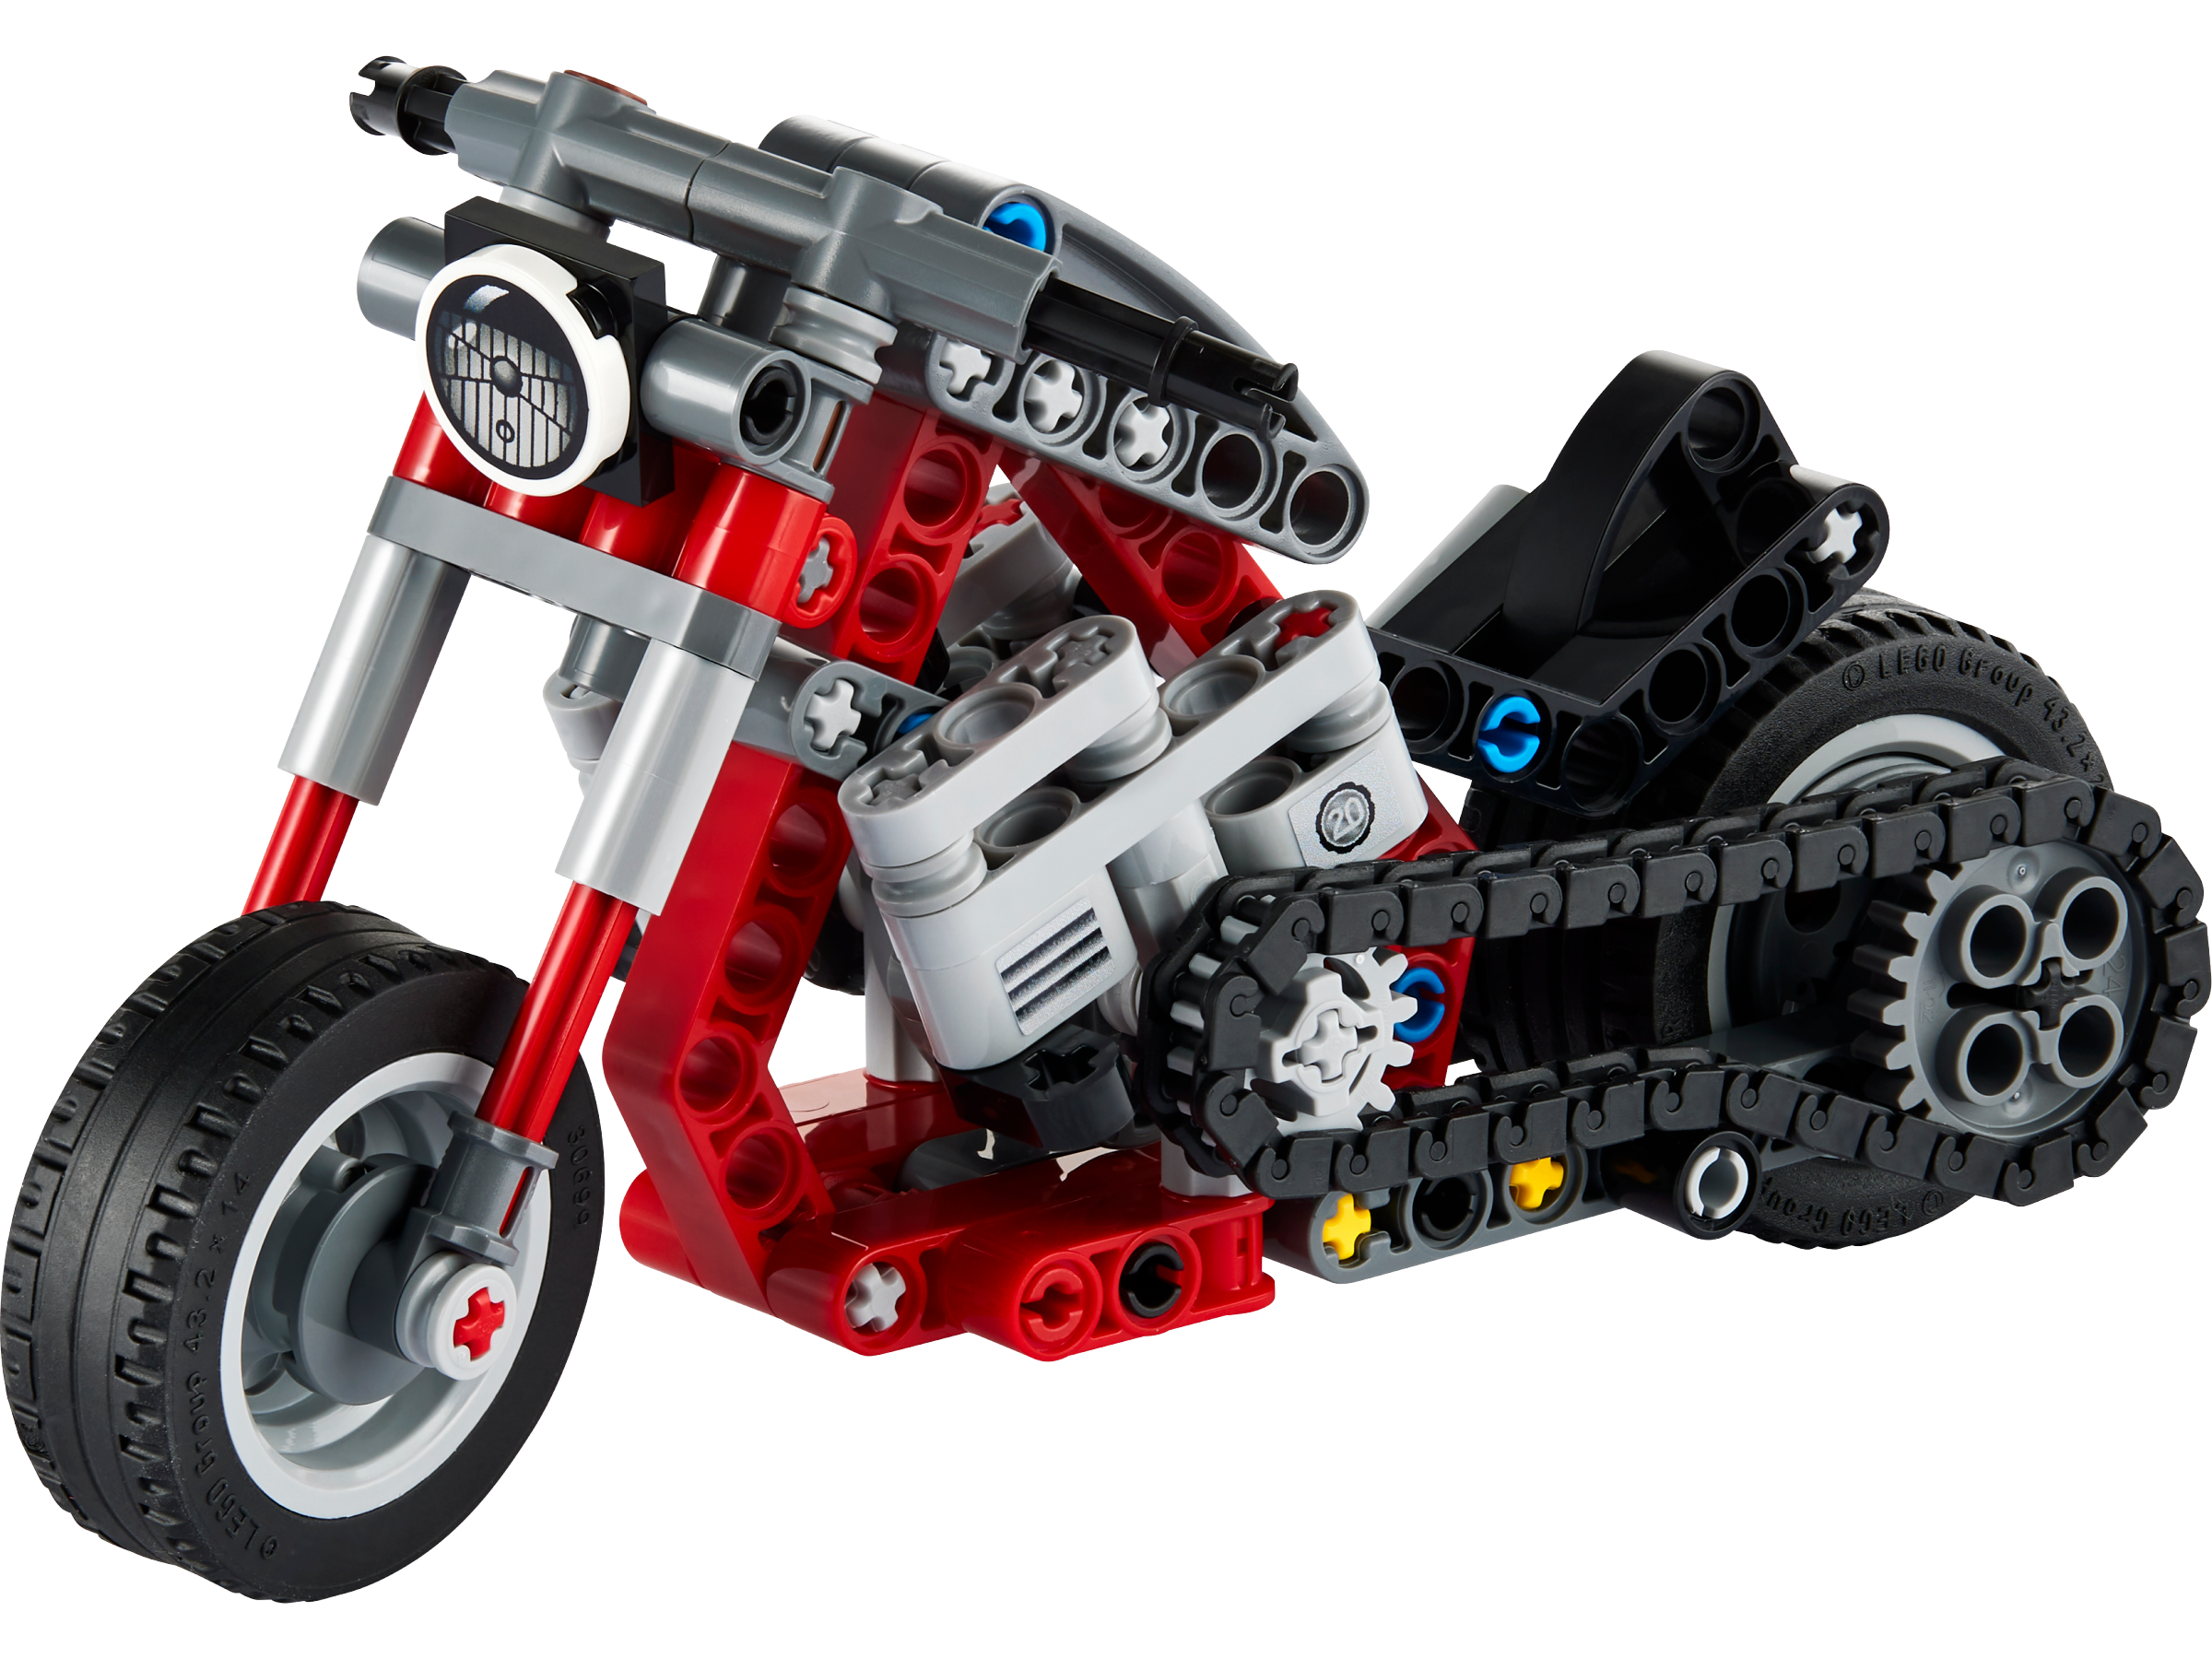 Motorcycle 42132 | Technic | Buy online at the Official LEGO® Shop SE